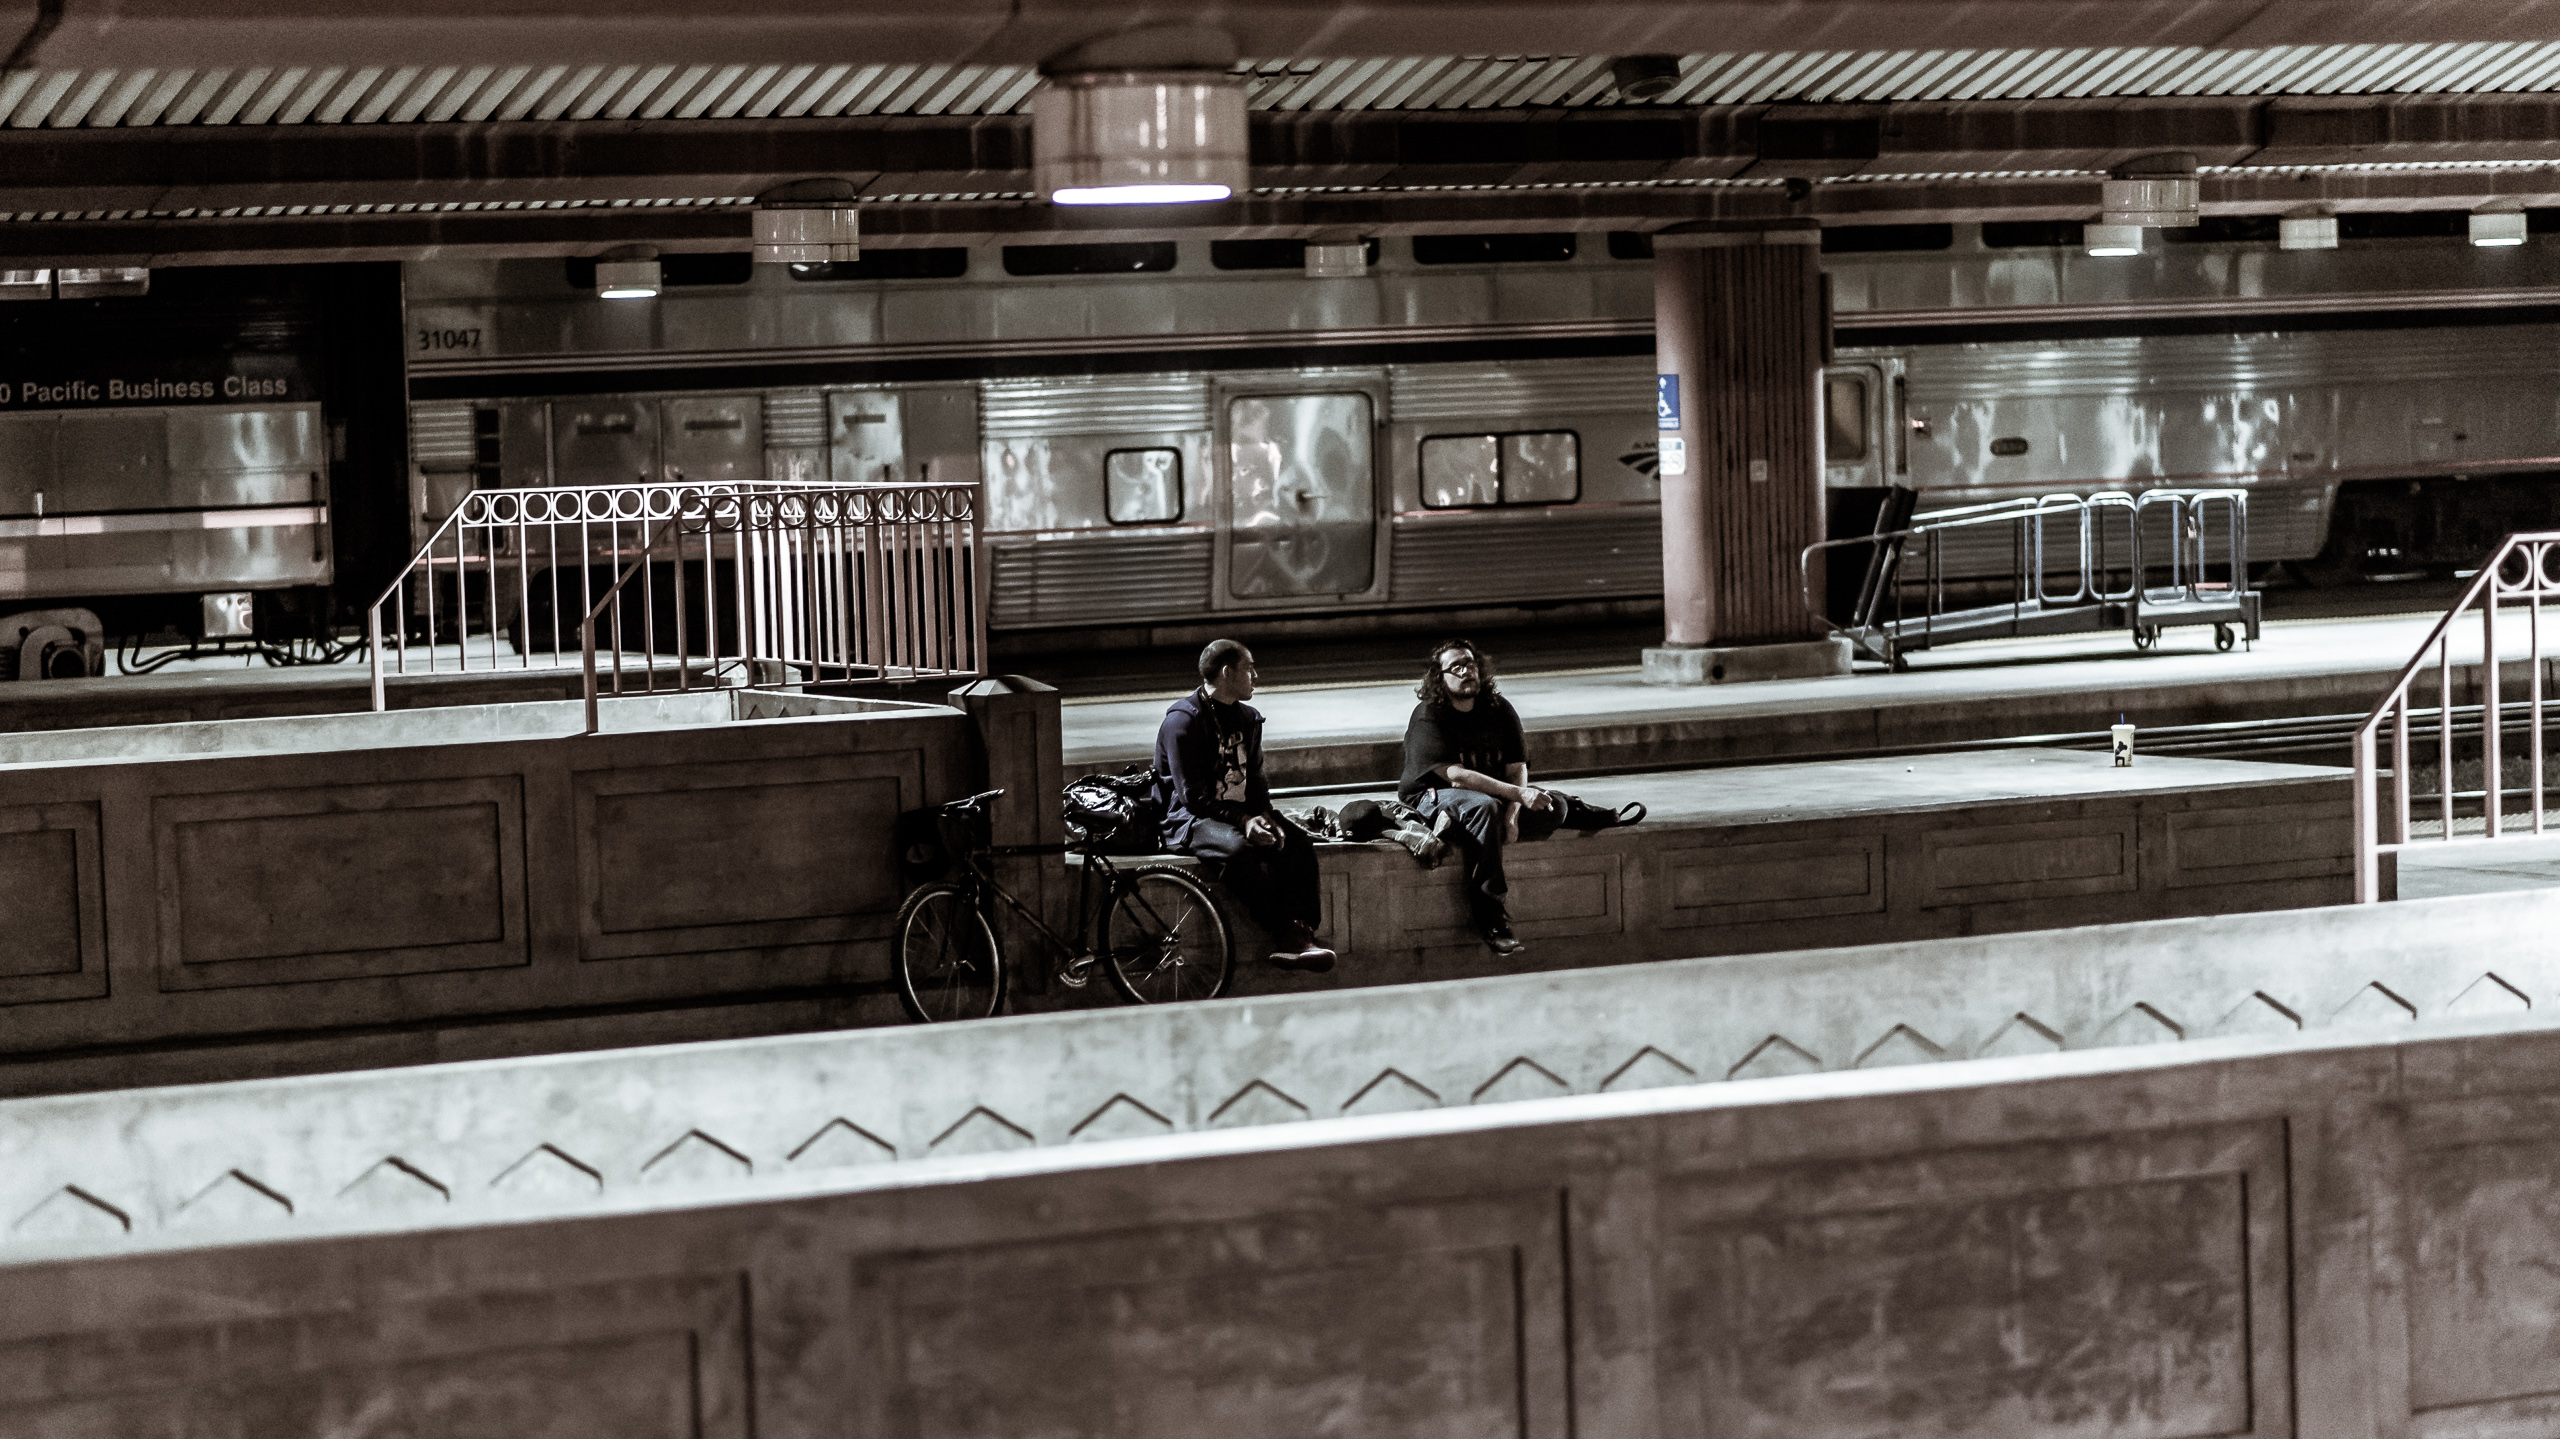 Two guys and a bicycle wait on a platform at Union Station in Los Angeles, for a Metrolink train.